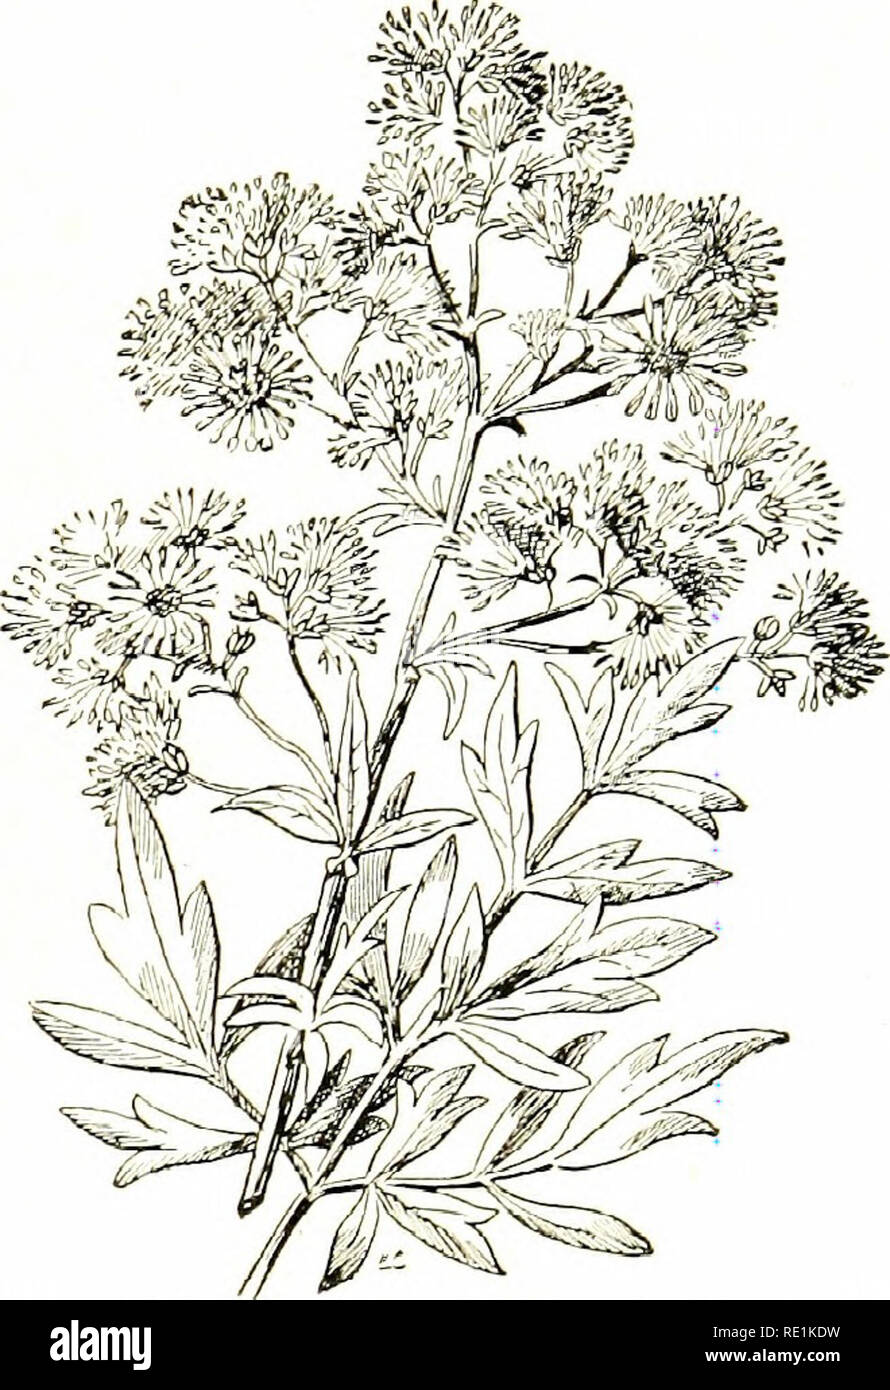 . Flowers of the field. Botany. BUTTERCUP FAMILY 5 3. T. mdjus (Greater Meadow-rue). — Slem 2—4 feet high, solid or hollow, branched, leafy to the base, flexuous, more or less furrowed ; leaves bi- or tri-pinnate, stipulate; stipules with horizon- tally-spreading or reflexed auricles; leiijlets&amp;rge, variable, 3—5 lobed; petioles with spreading branches;  Jlcnaets in a loose, generally leafy, compound raceme with spreading branches, drooping ; sepals 4, yellow-green ; anthers apiculate. A form with a solid stem and reflexed auricles to its stipules occurs in damp. THALICTKU.M FLAVUM {YclIo Stock Photo